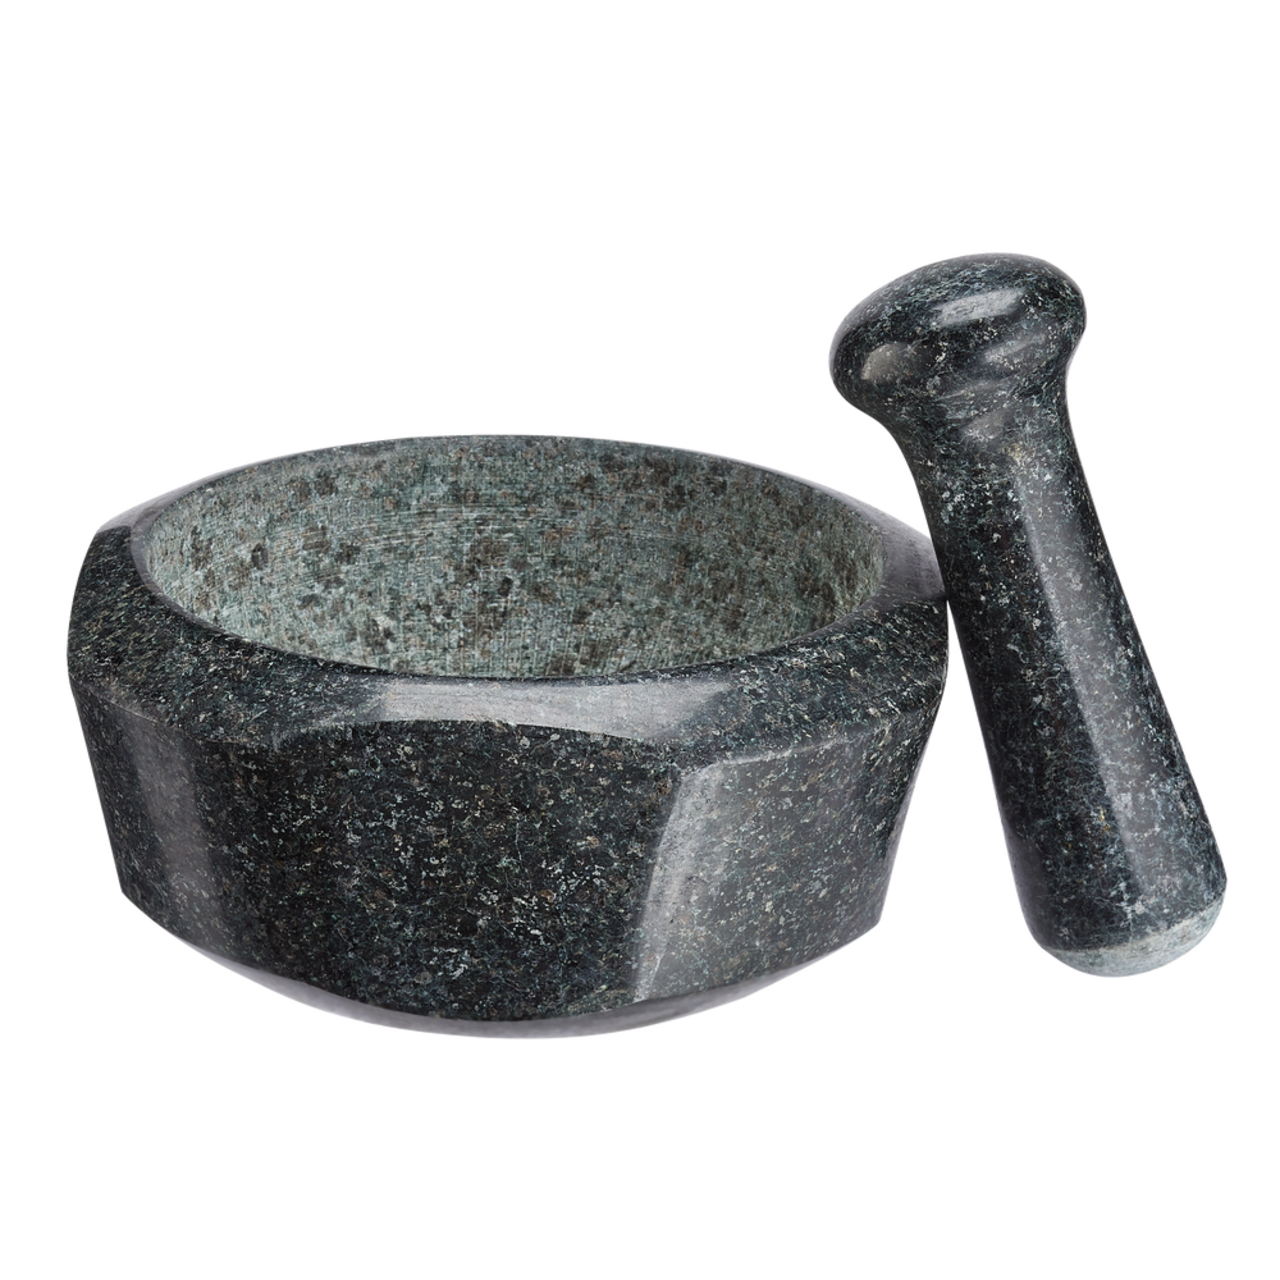 https://media-www.canadiantire.ca/product/living/kitchen/dining-and-entertaining/1425856/paderno-large-mortar-pestle-e5e33084-6692-494a-9384-54ae144a4ed5.png?imdensity=1&imwidth=1244&impolicy=mZoom